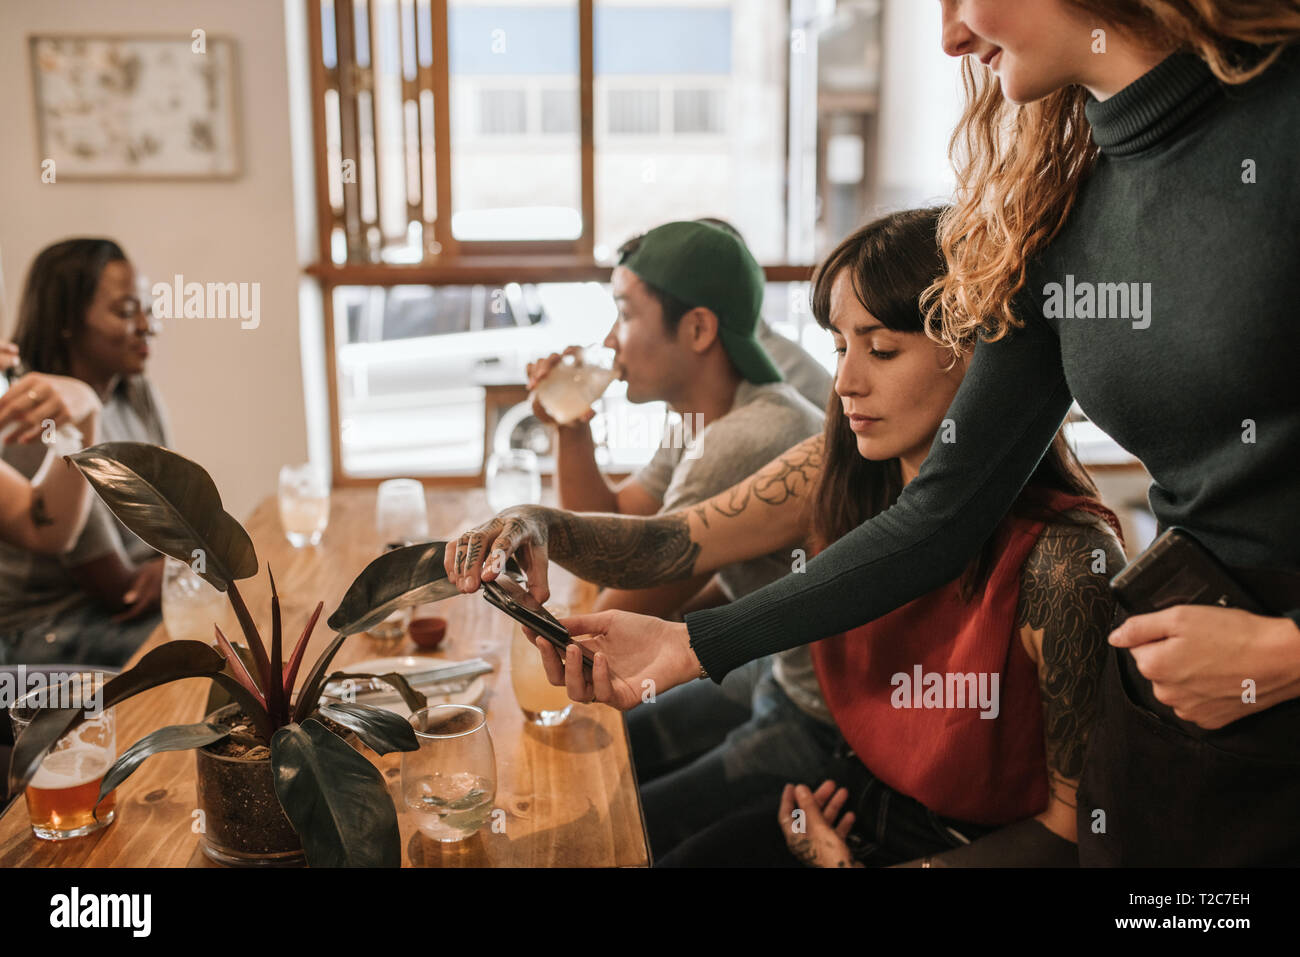 Customer using her cellphone and an nfc terminal to pay for the check in restaurant while out with friends Stock Photo